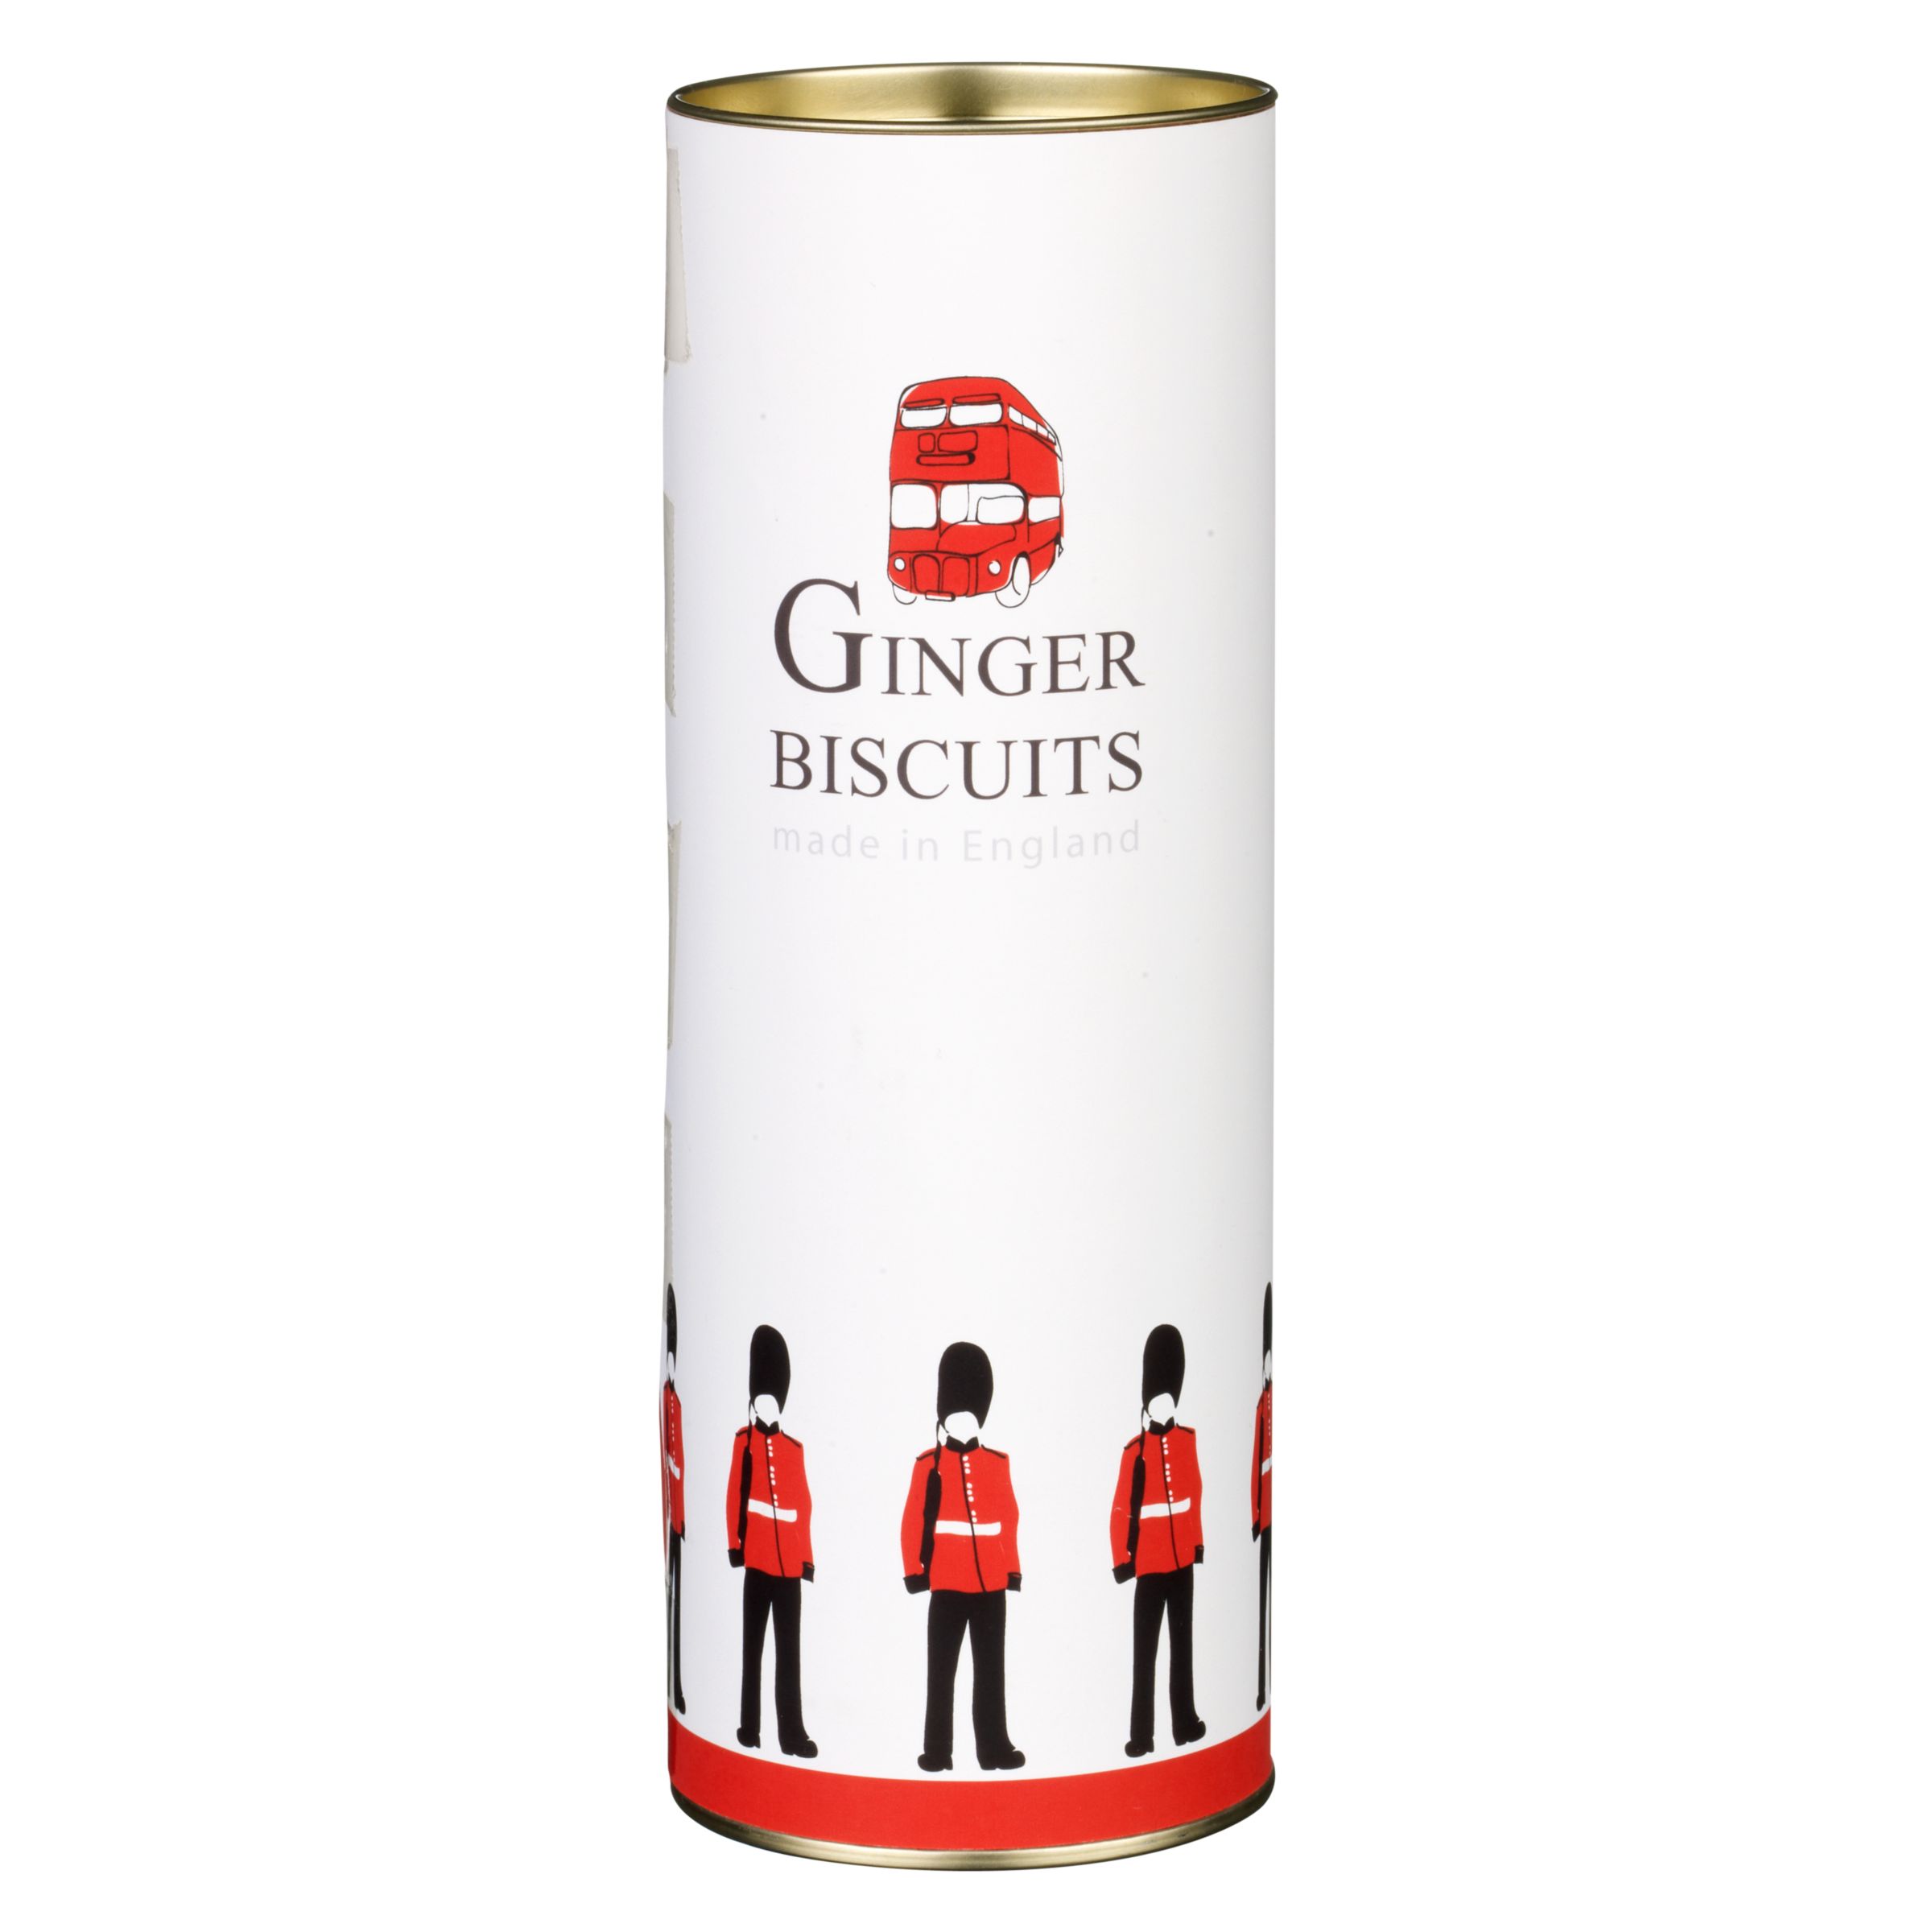 London Ginger Biscuits, 150g 161047